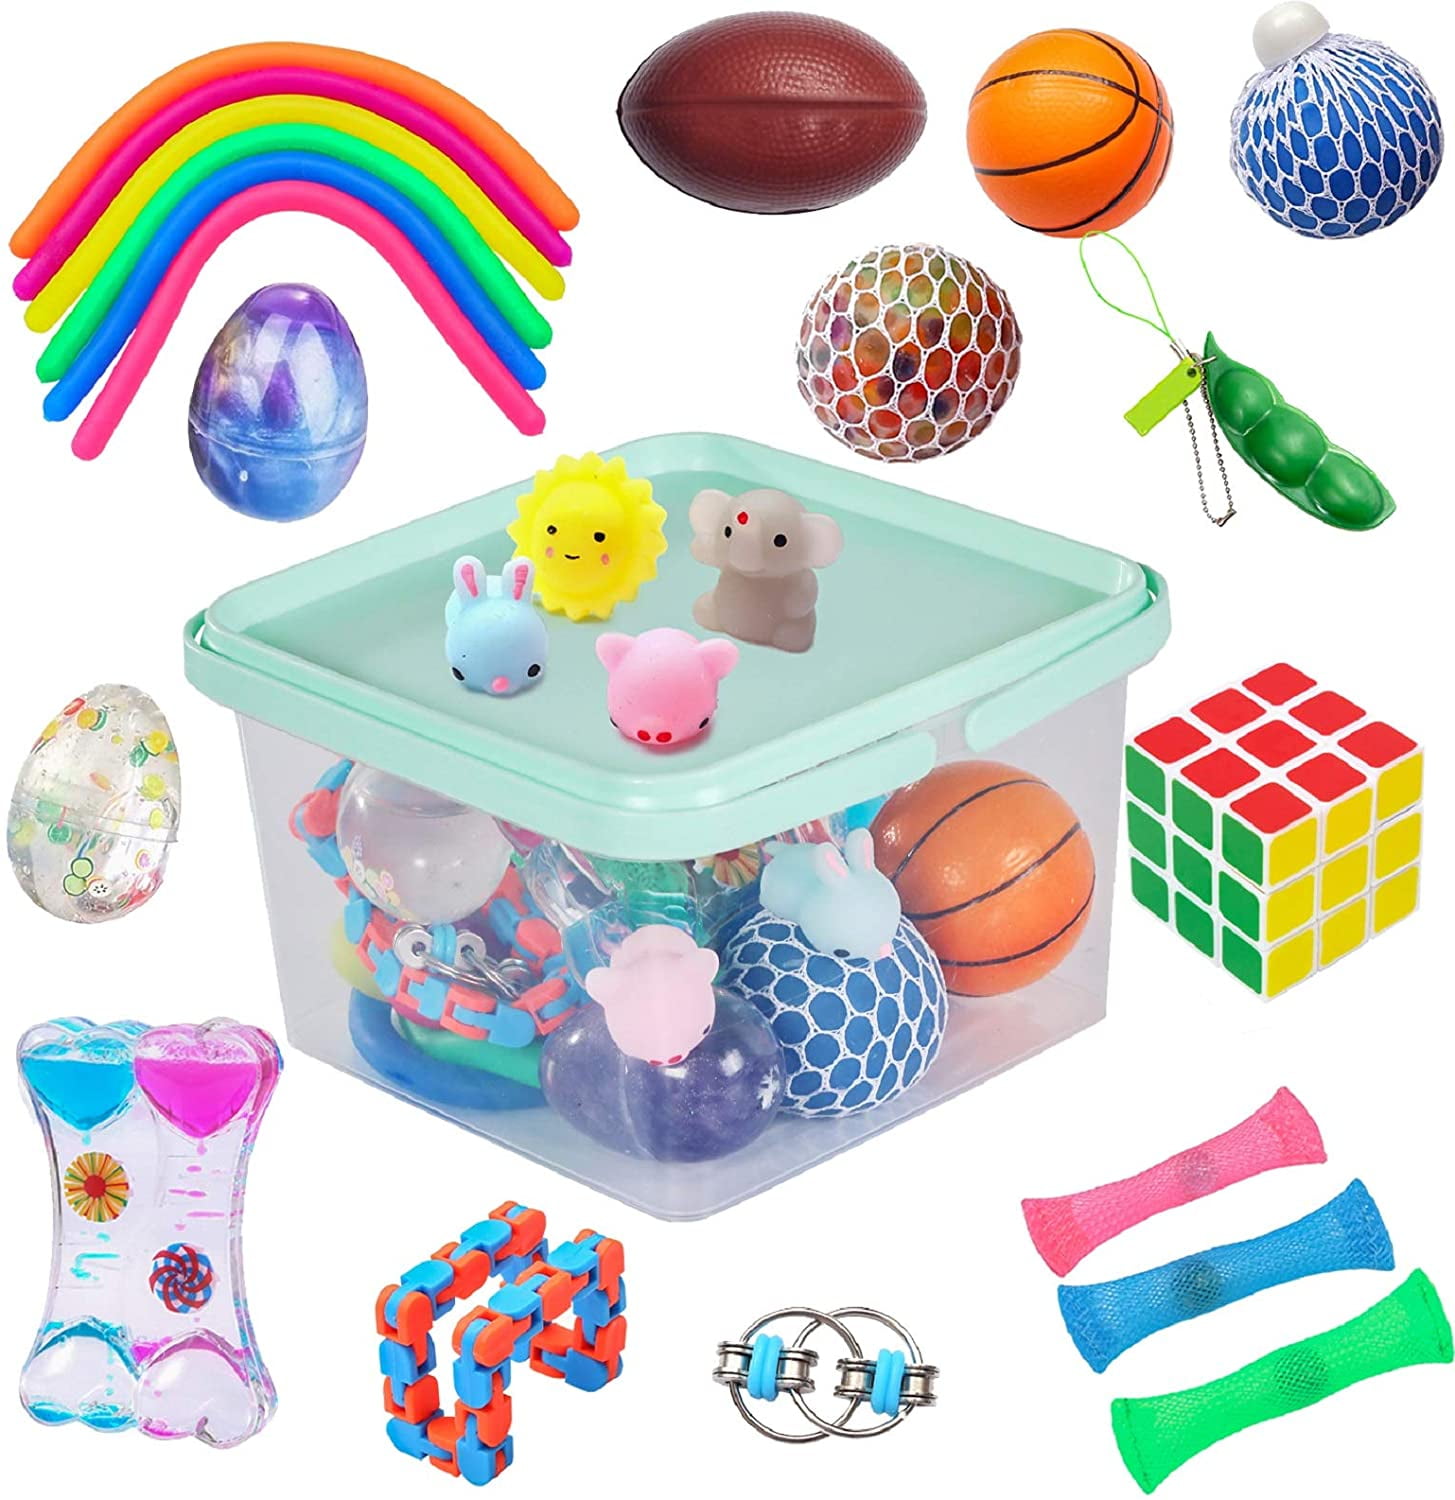 Fidget Toys for Adults Marble Mesh & More Stress Toys Anxiety Relief Toys 24 Pcs Fidget Pack Fidget Toy Set for Boys Fidget Spinner Stress Balls Sensory Toys for Autistic Children 